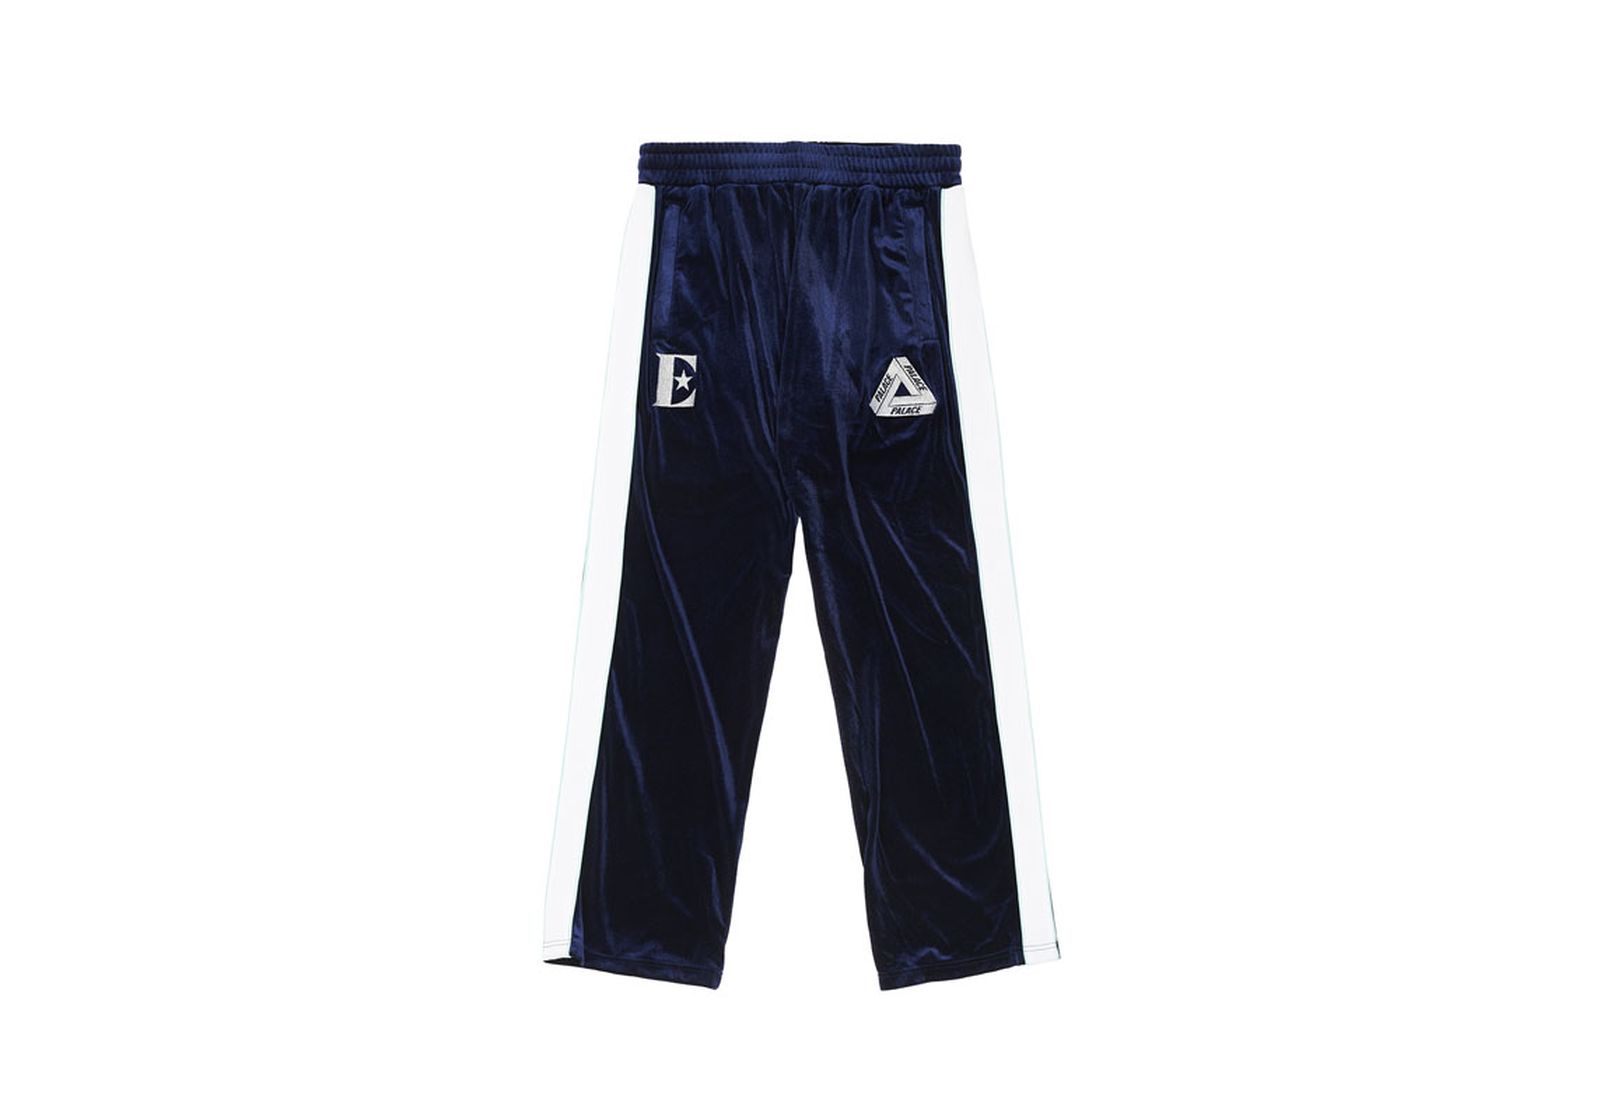 Palace_2022_Spring_trousers_EJ_nvy_11200